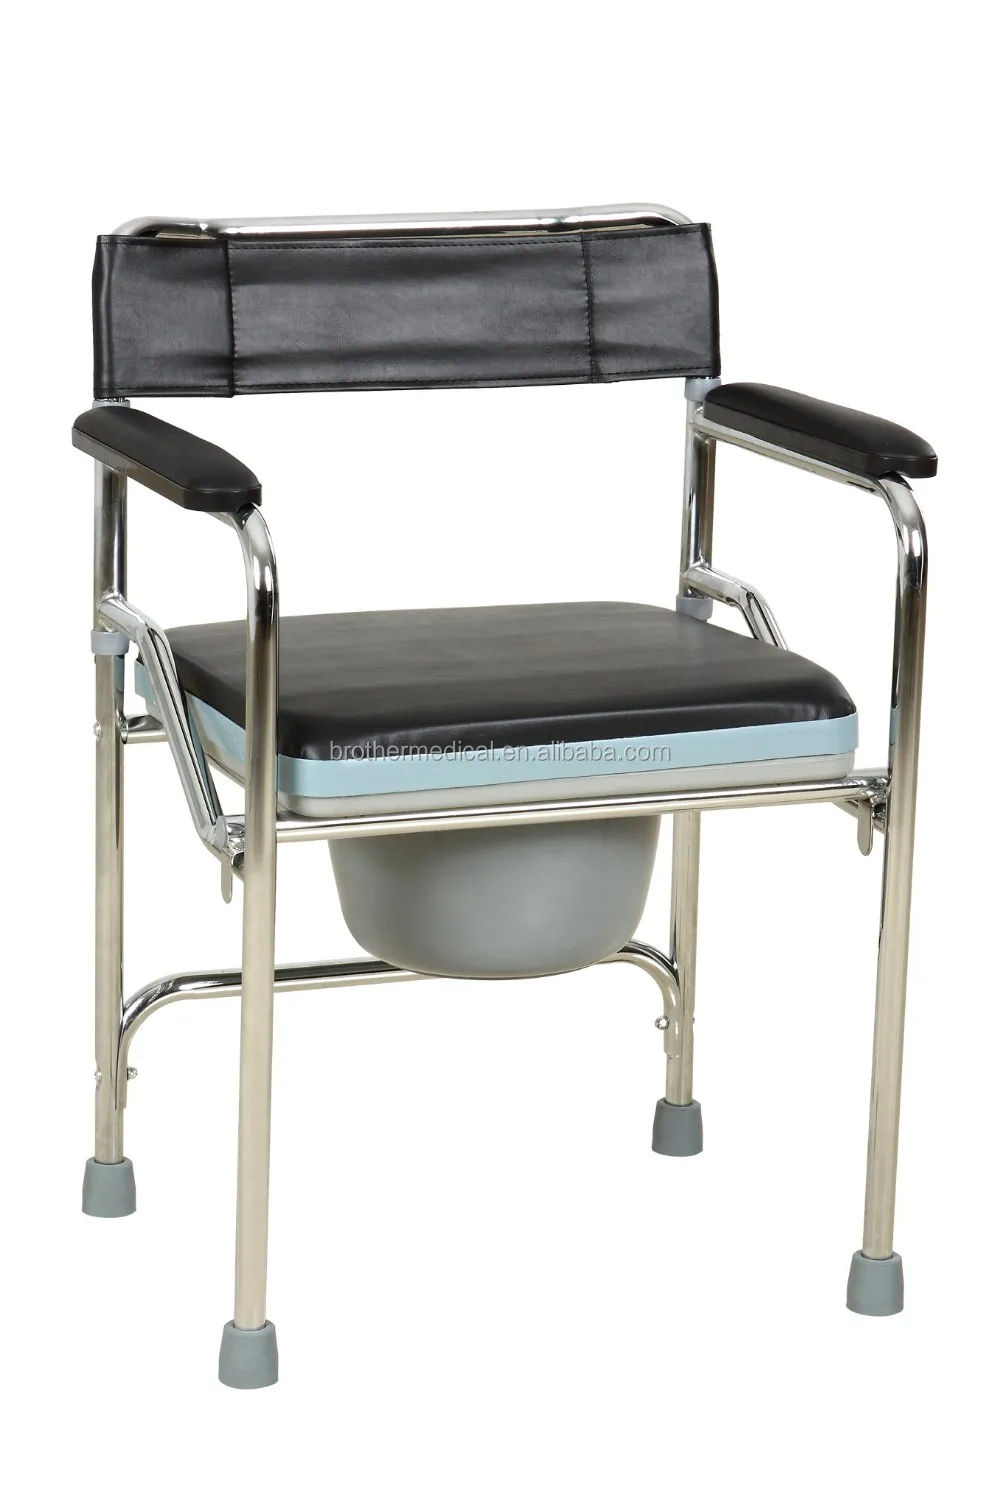 China Supplier Human Disabled Folding Toilet Commode Wheel Chair For